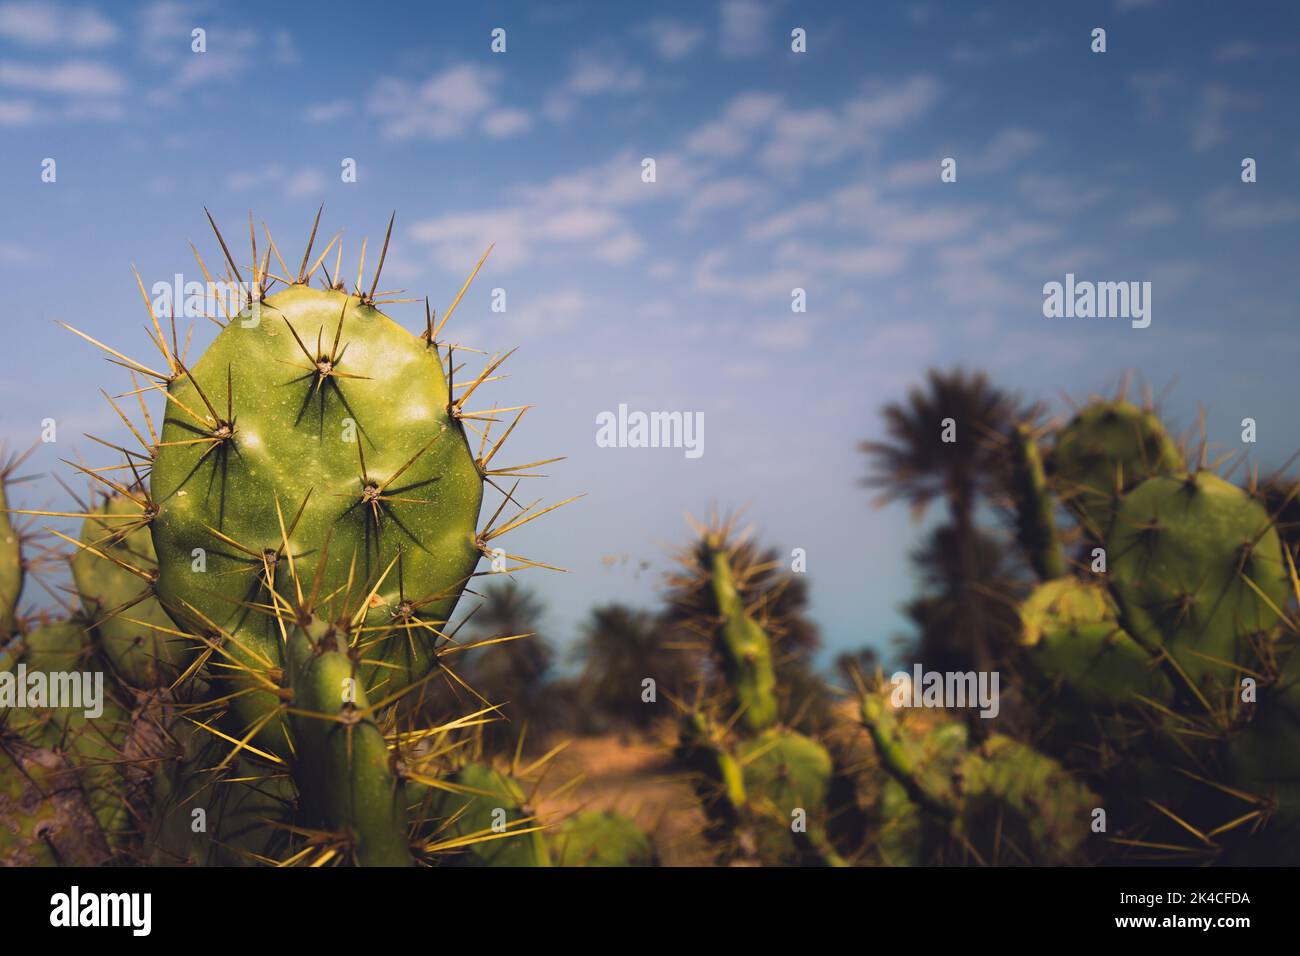 A closeup shot of cactuses in sunny weather Stock Photo